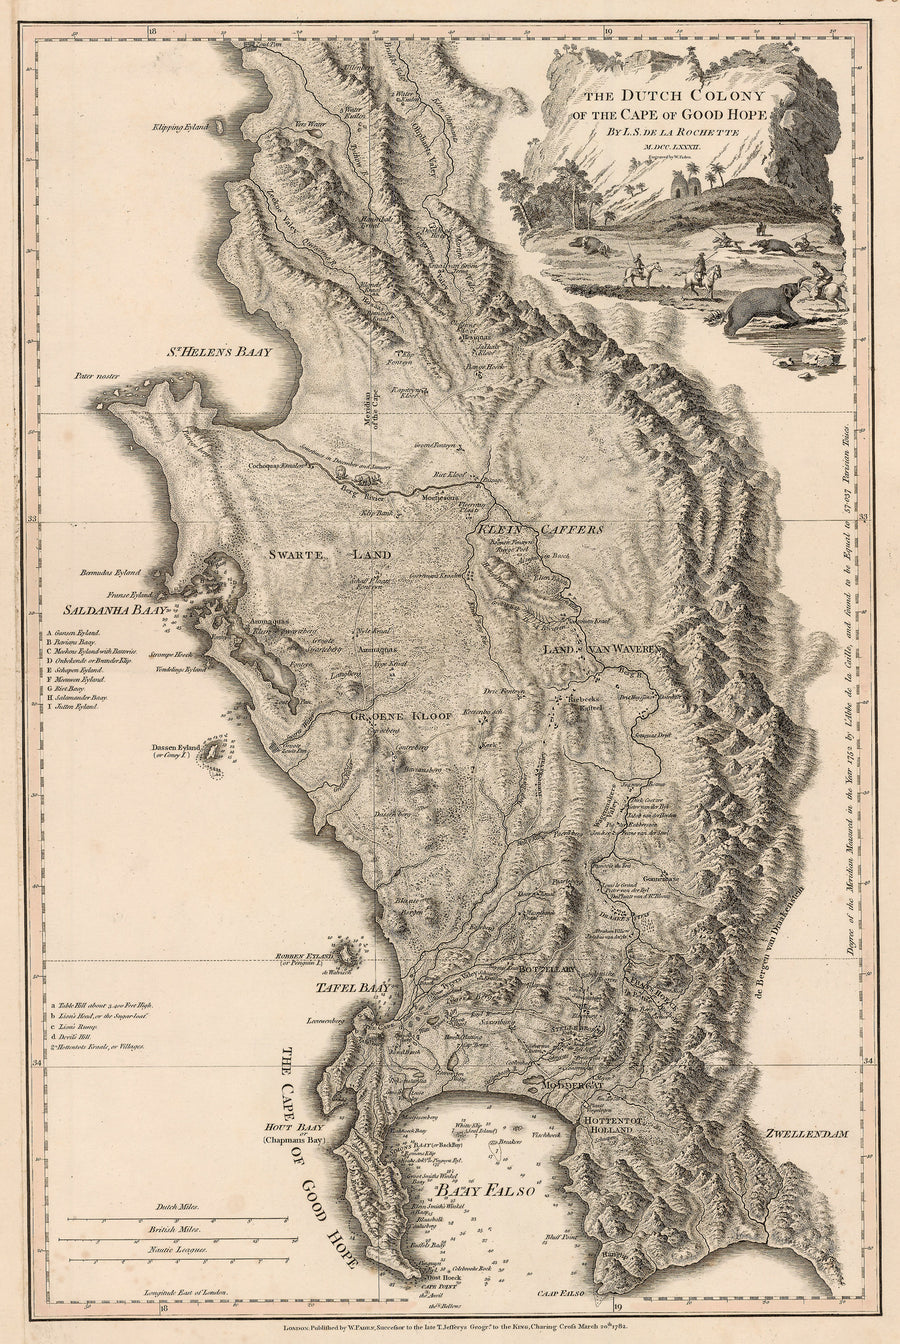 1782 The Dutch Colony of the Cape of Good Hope